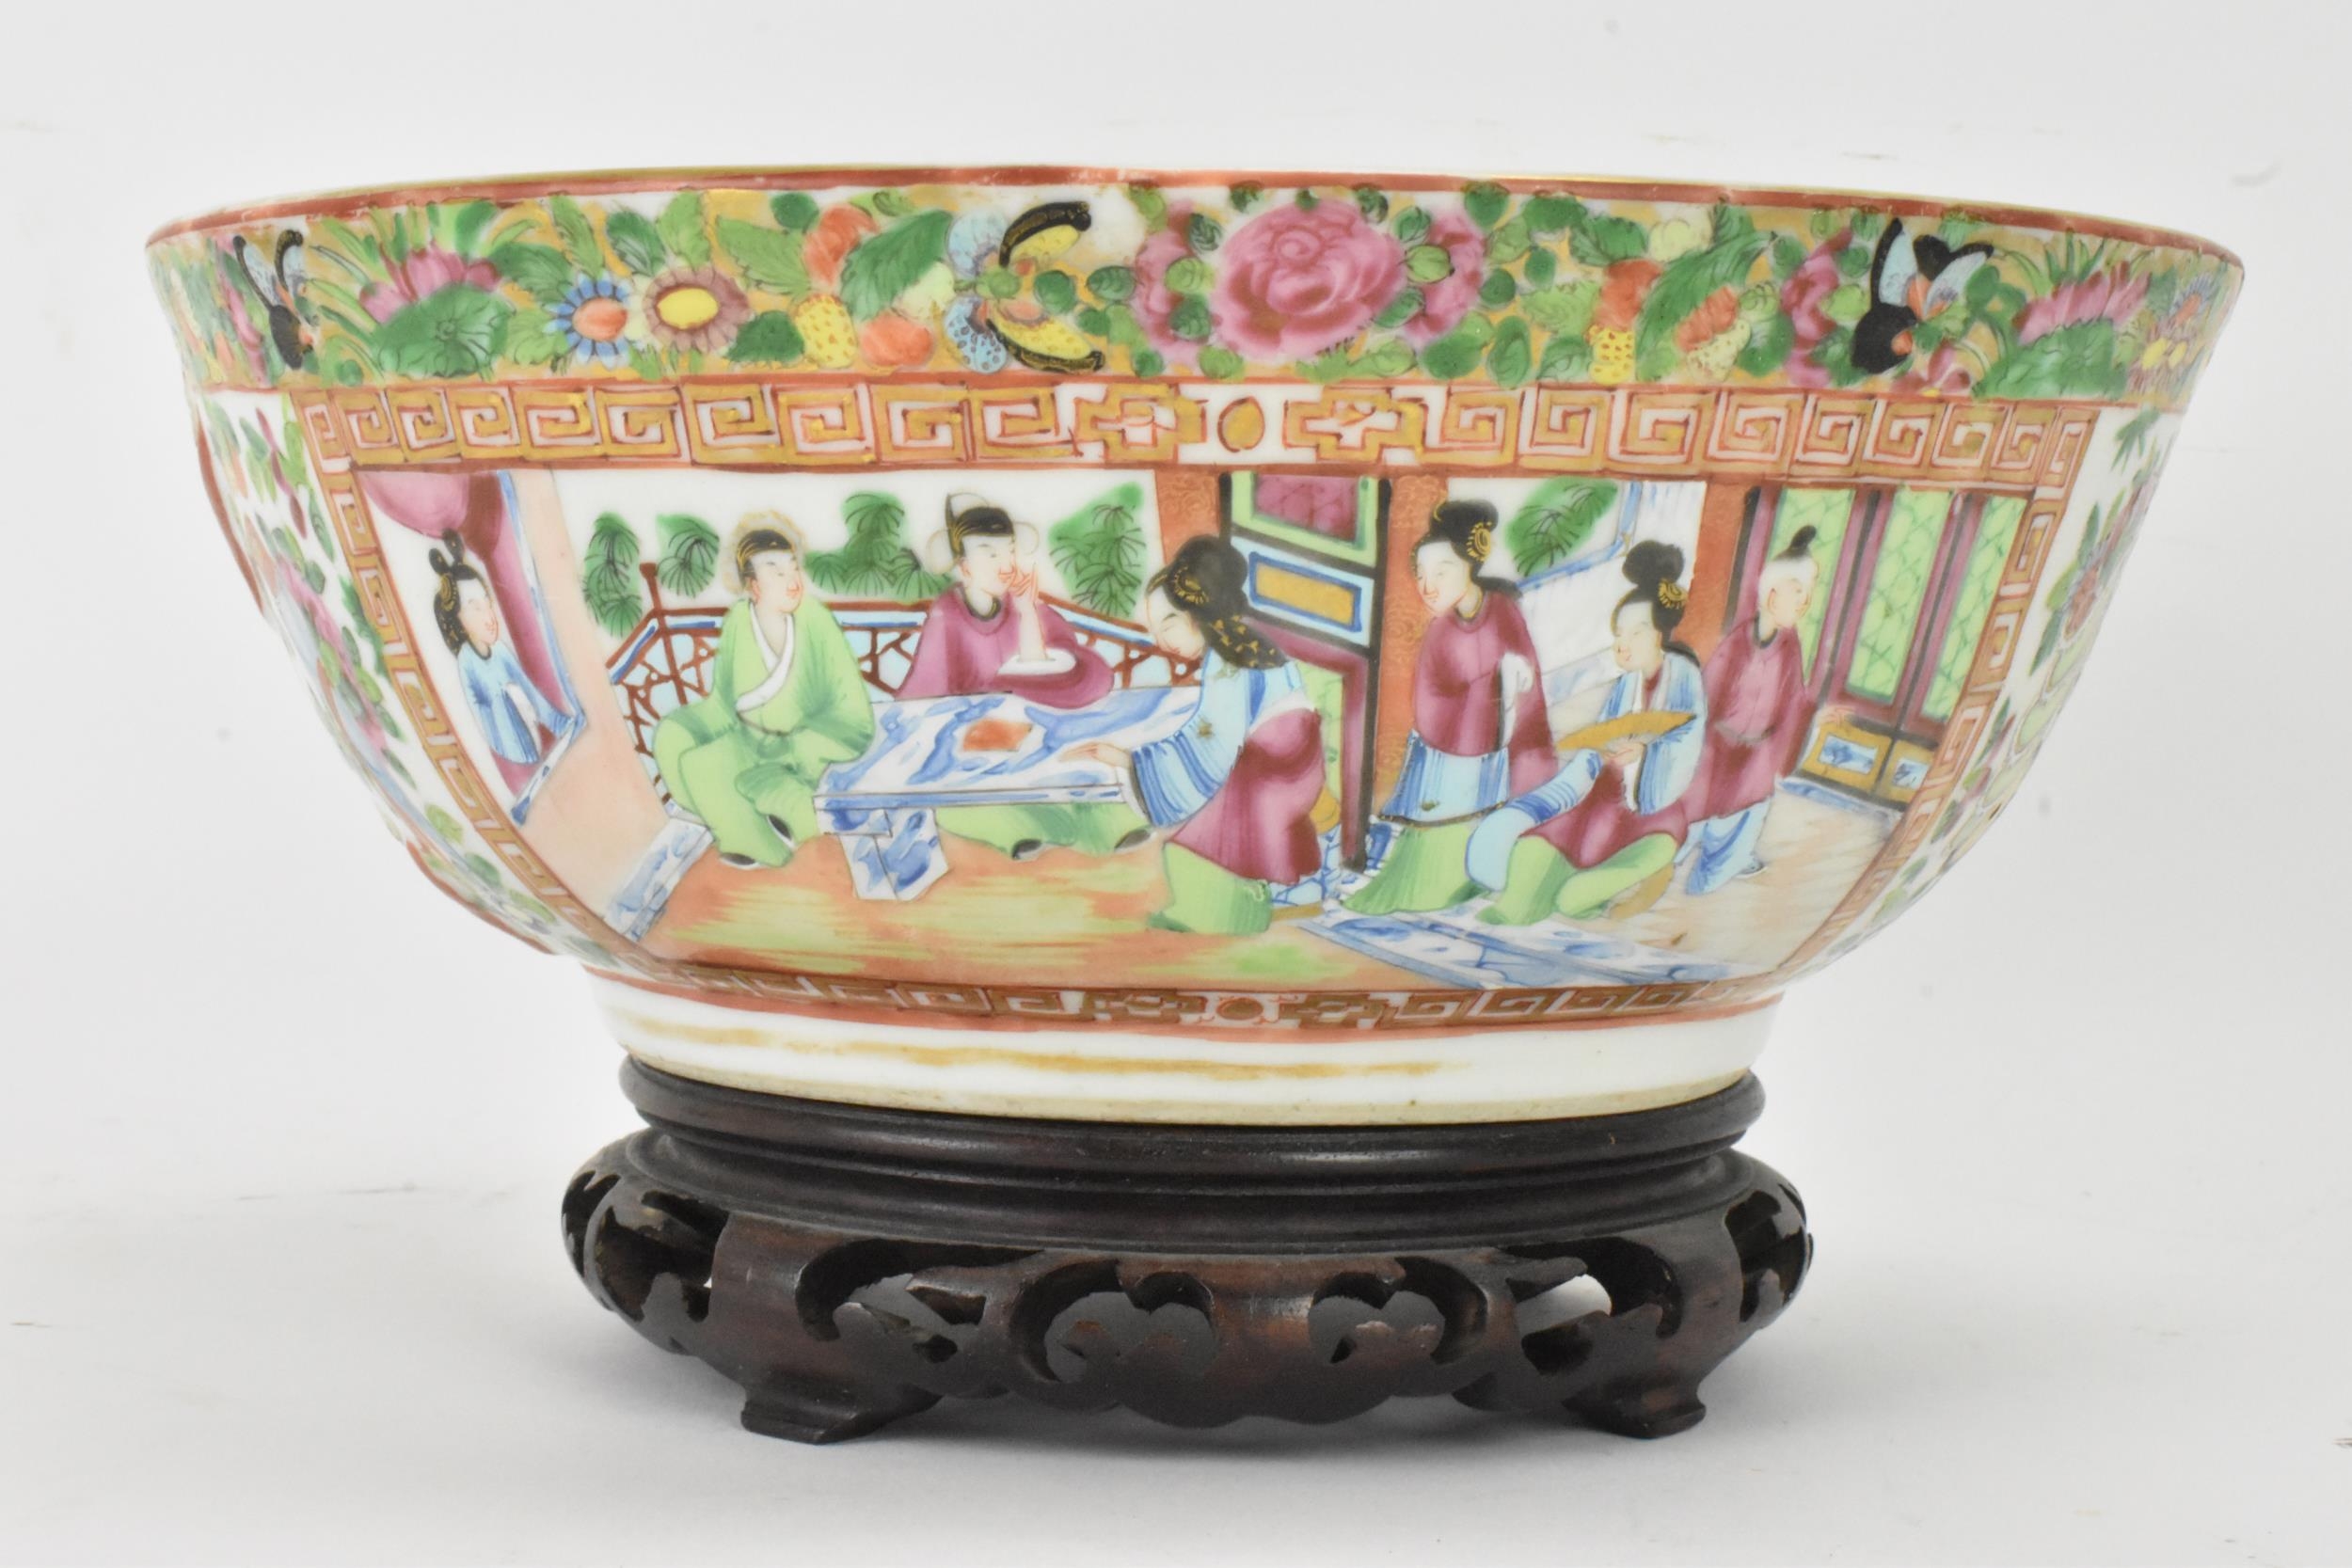 A Chinese export late 19th century Canton Famille Rose bowl, in polychrome enamels, the exterior